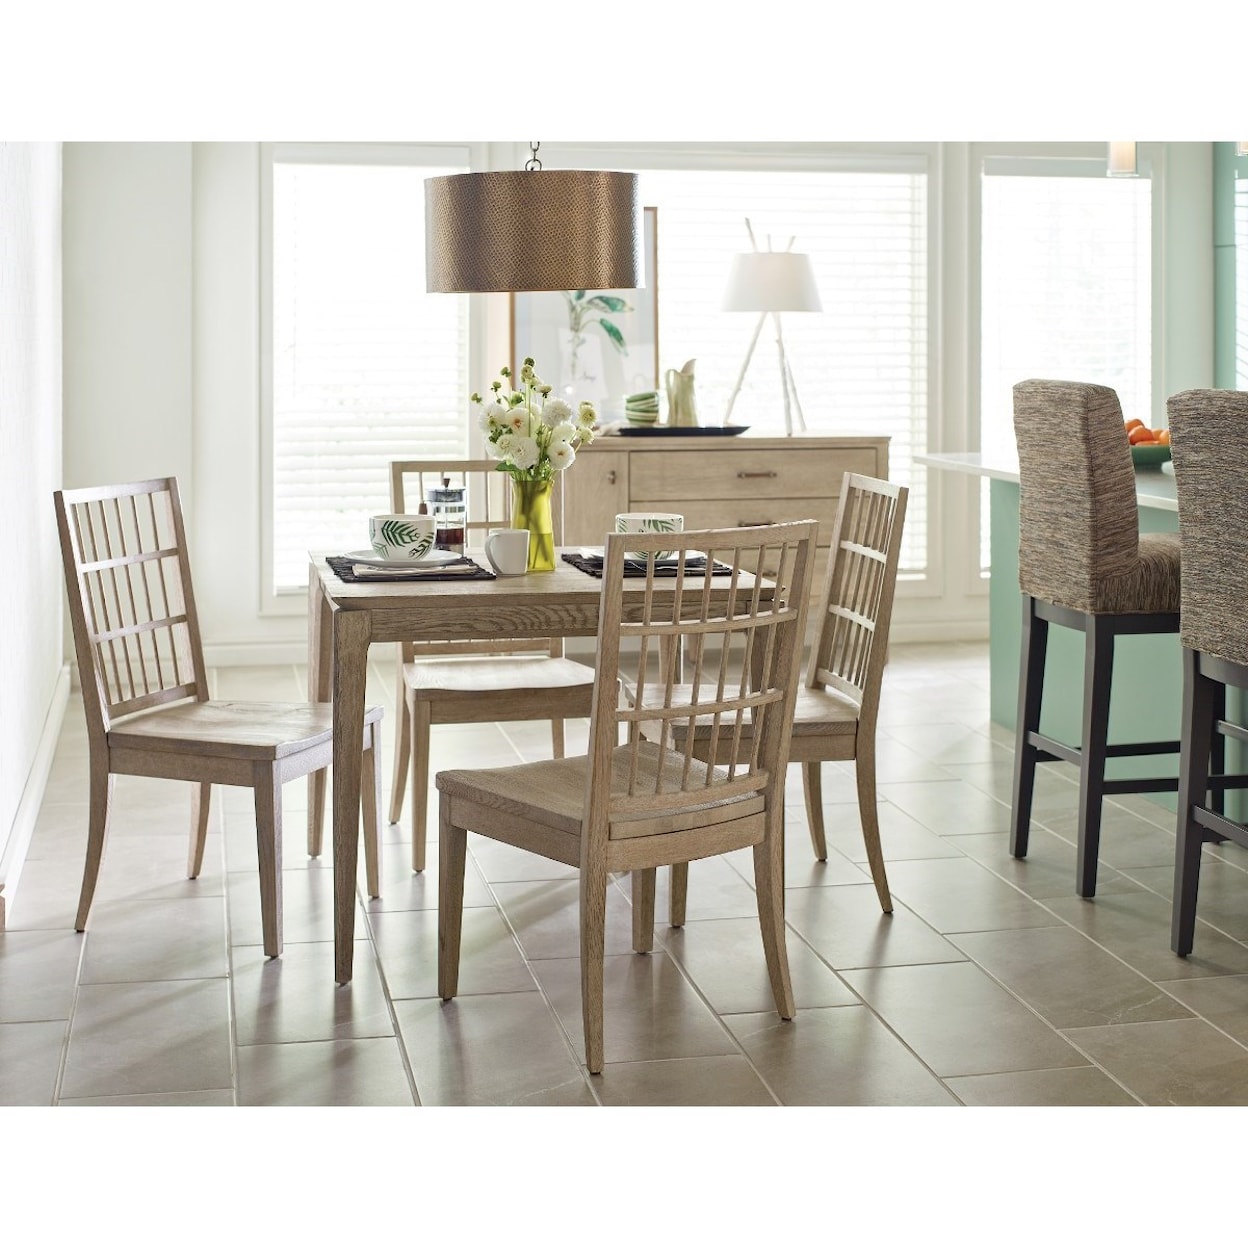 Kincaid Furniture Symmetry Dining Room Group